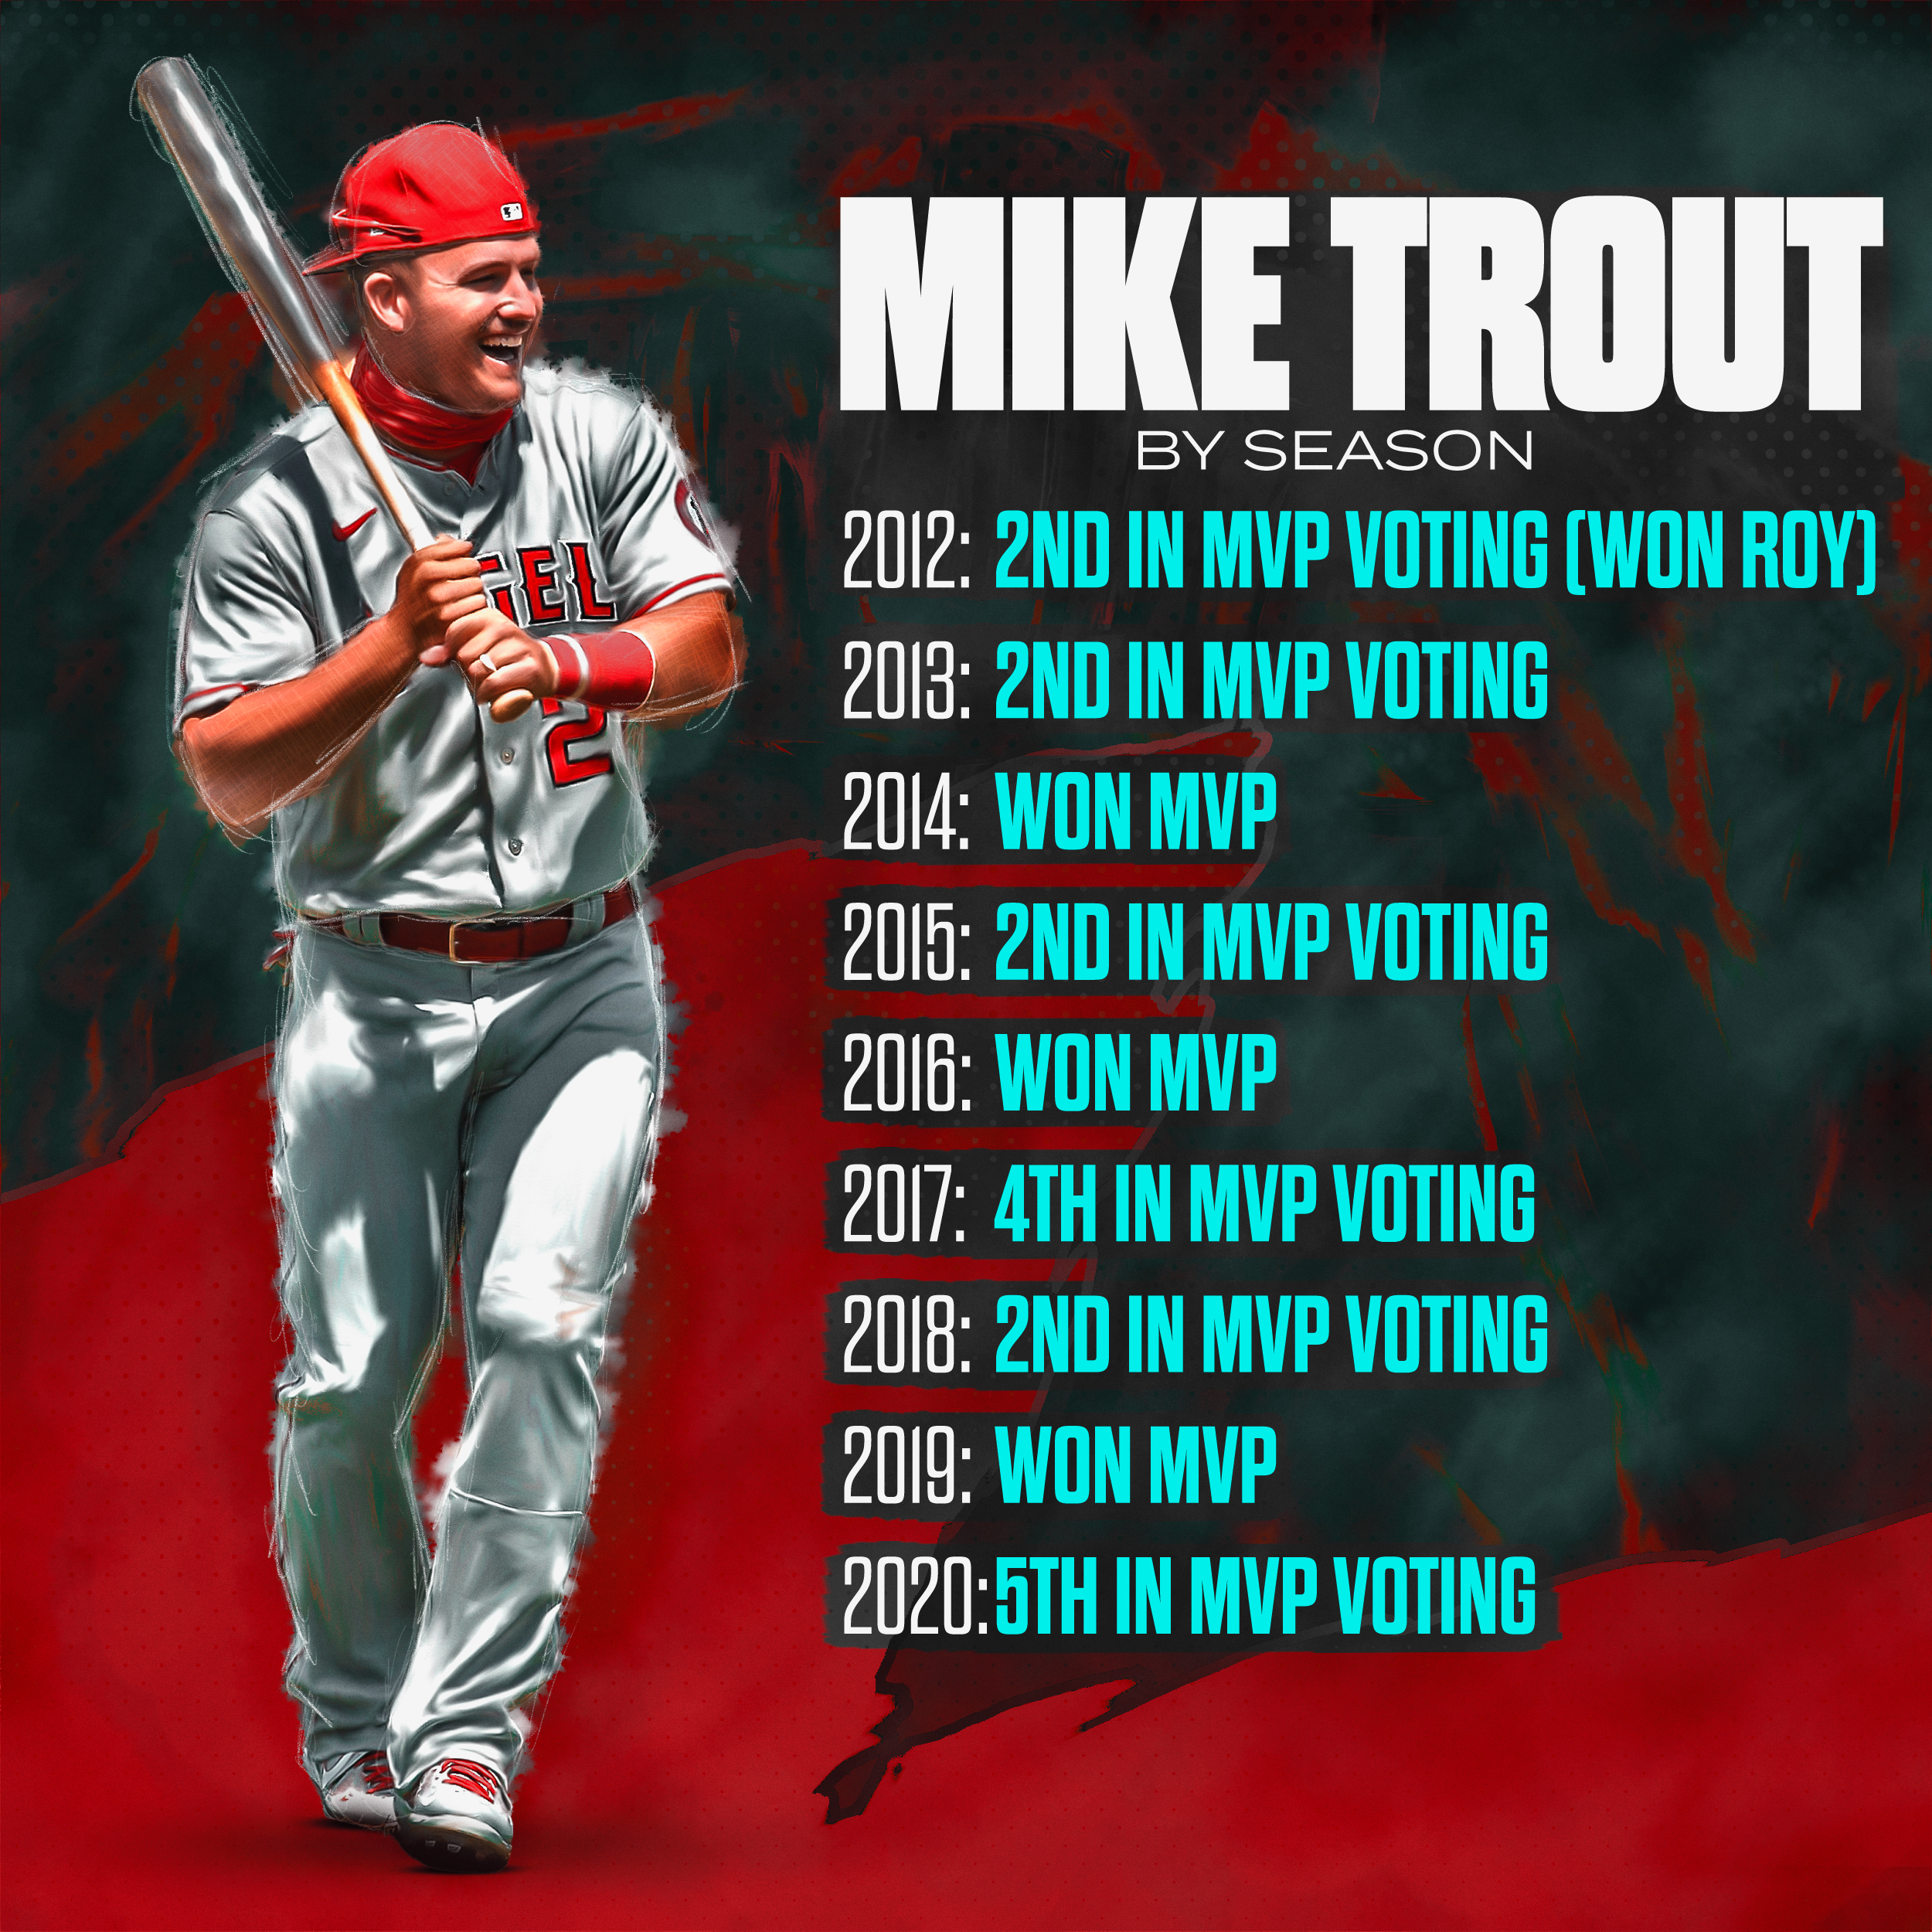 Los Angeles Angels on X: Keep @MikeTrout in the lead! Vote for